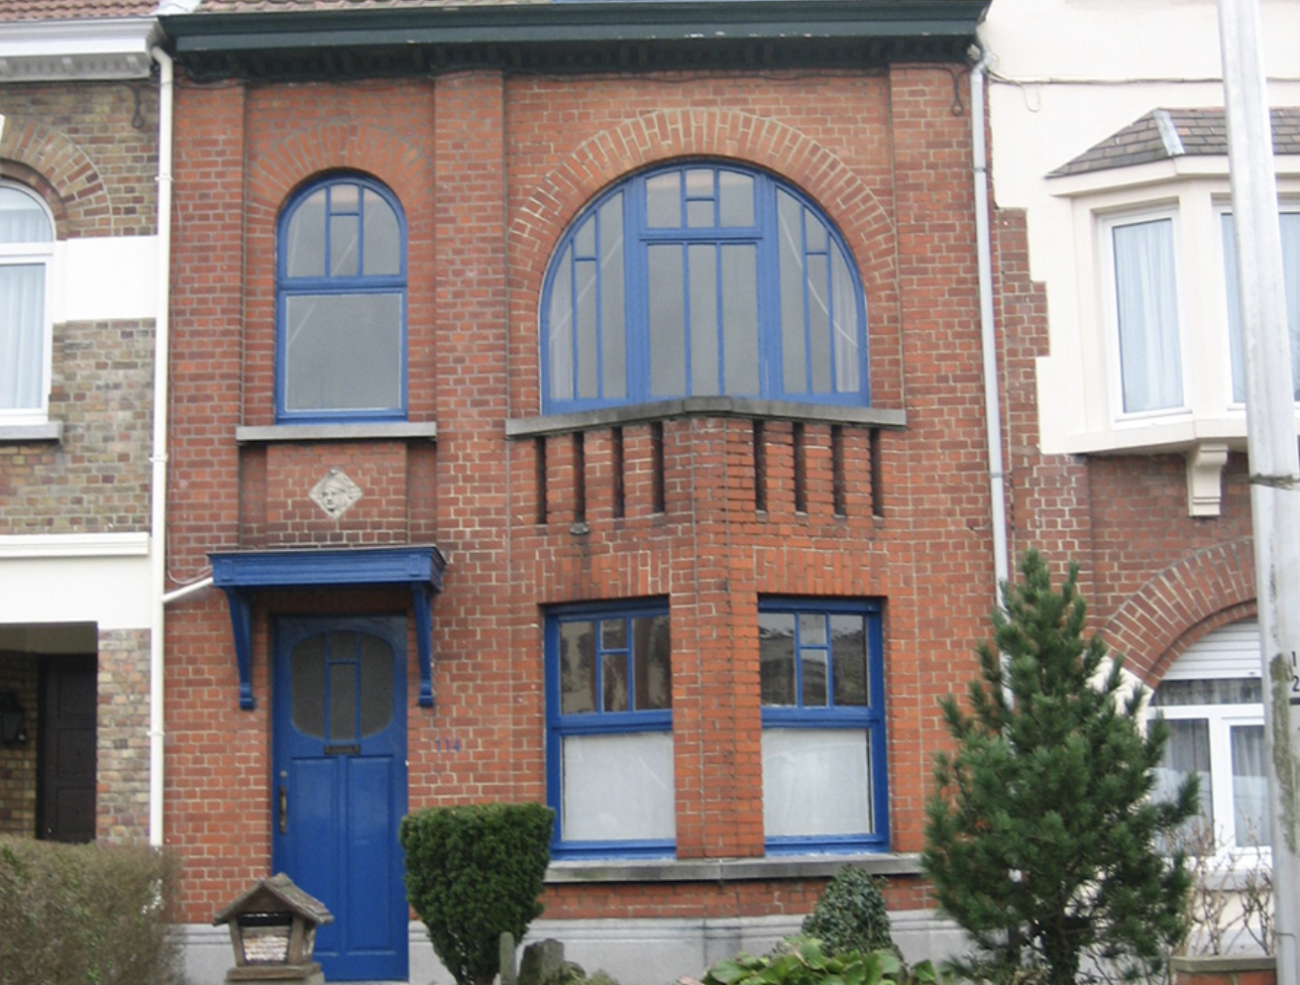 Two-story building with damaged red bricks, with half-moon windows and a blue door